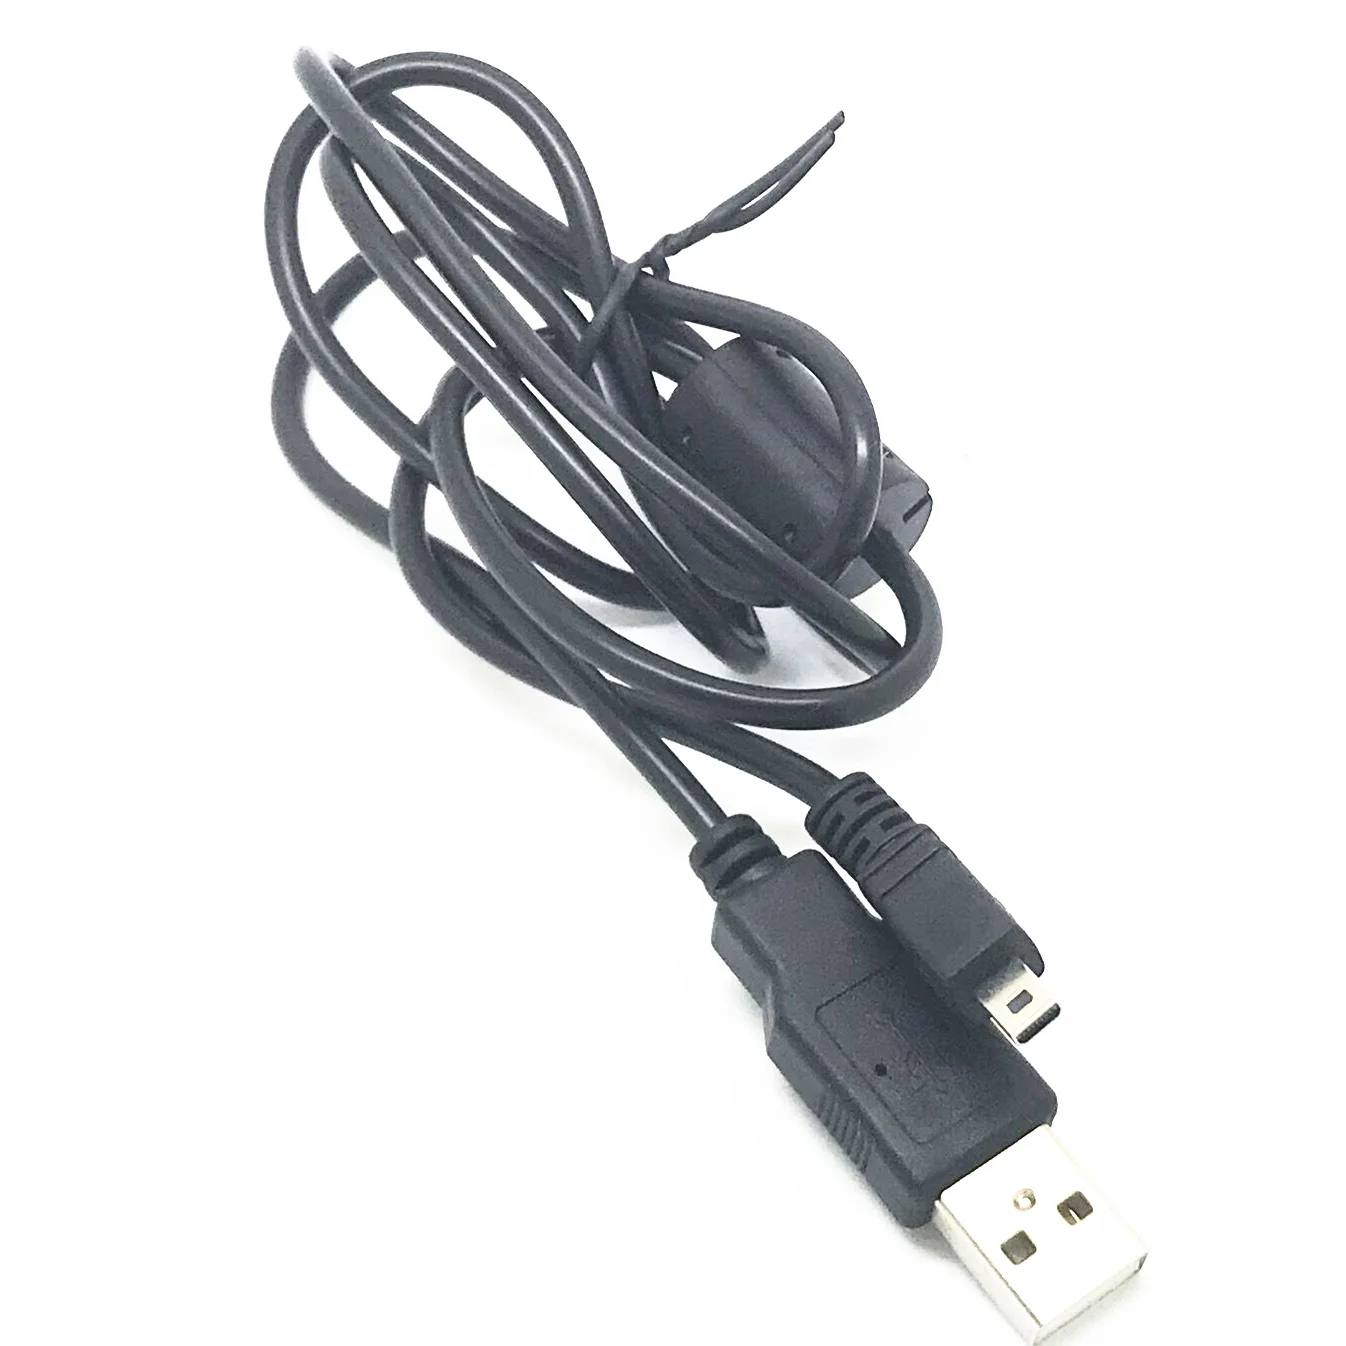  USB PC Sync Data Charging Cable for SIGMA DP1 Merrill DP1M  Mobile Phone Adapters &